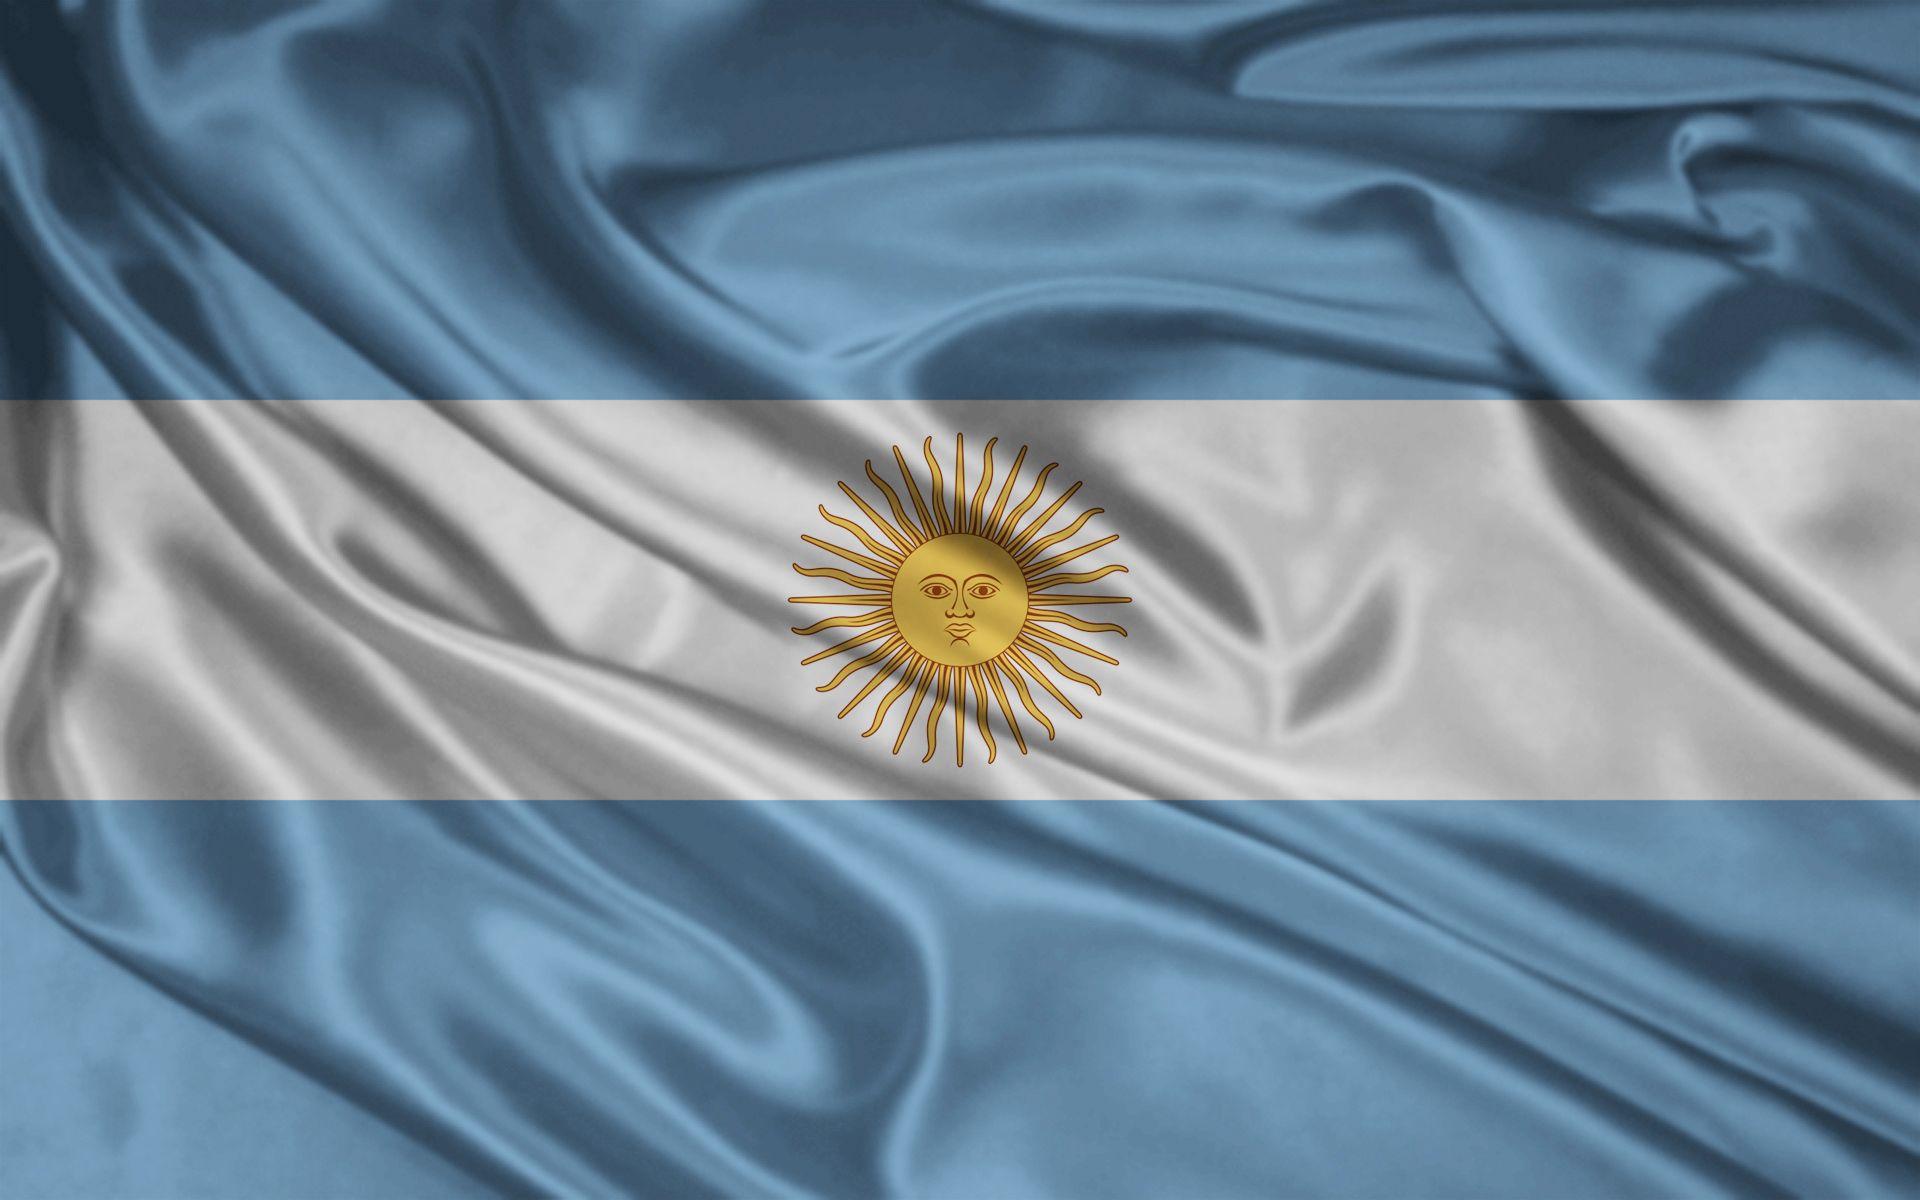 Argentina Wallpaper for Free Download, 47 Argentina High Quality